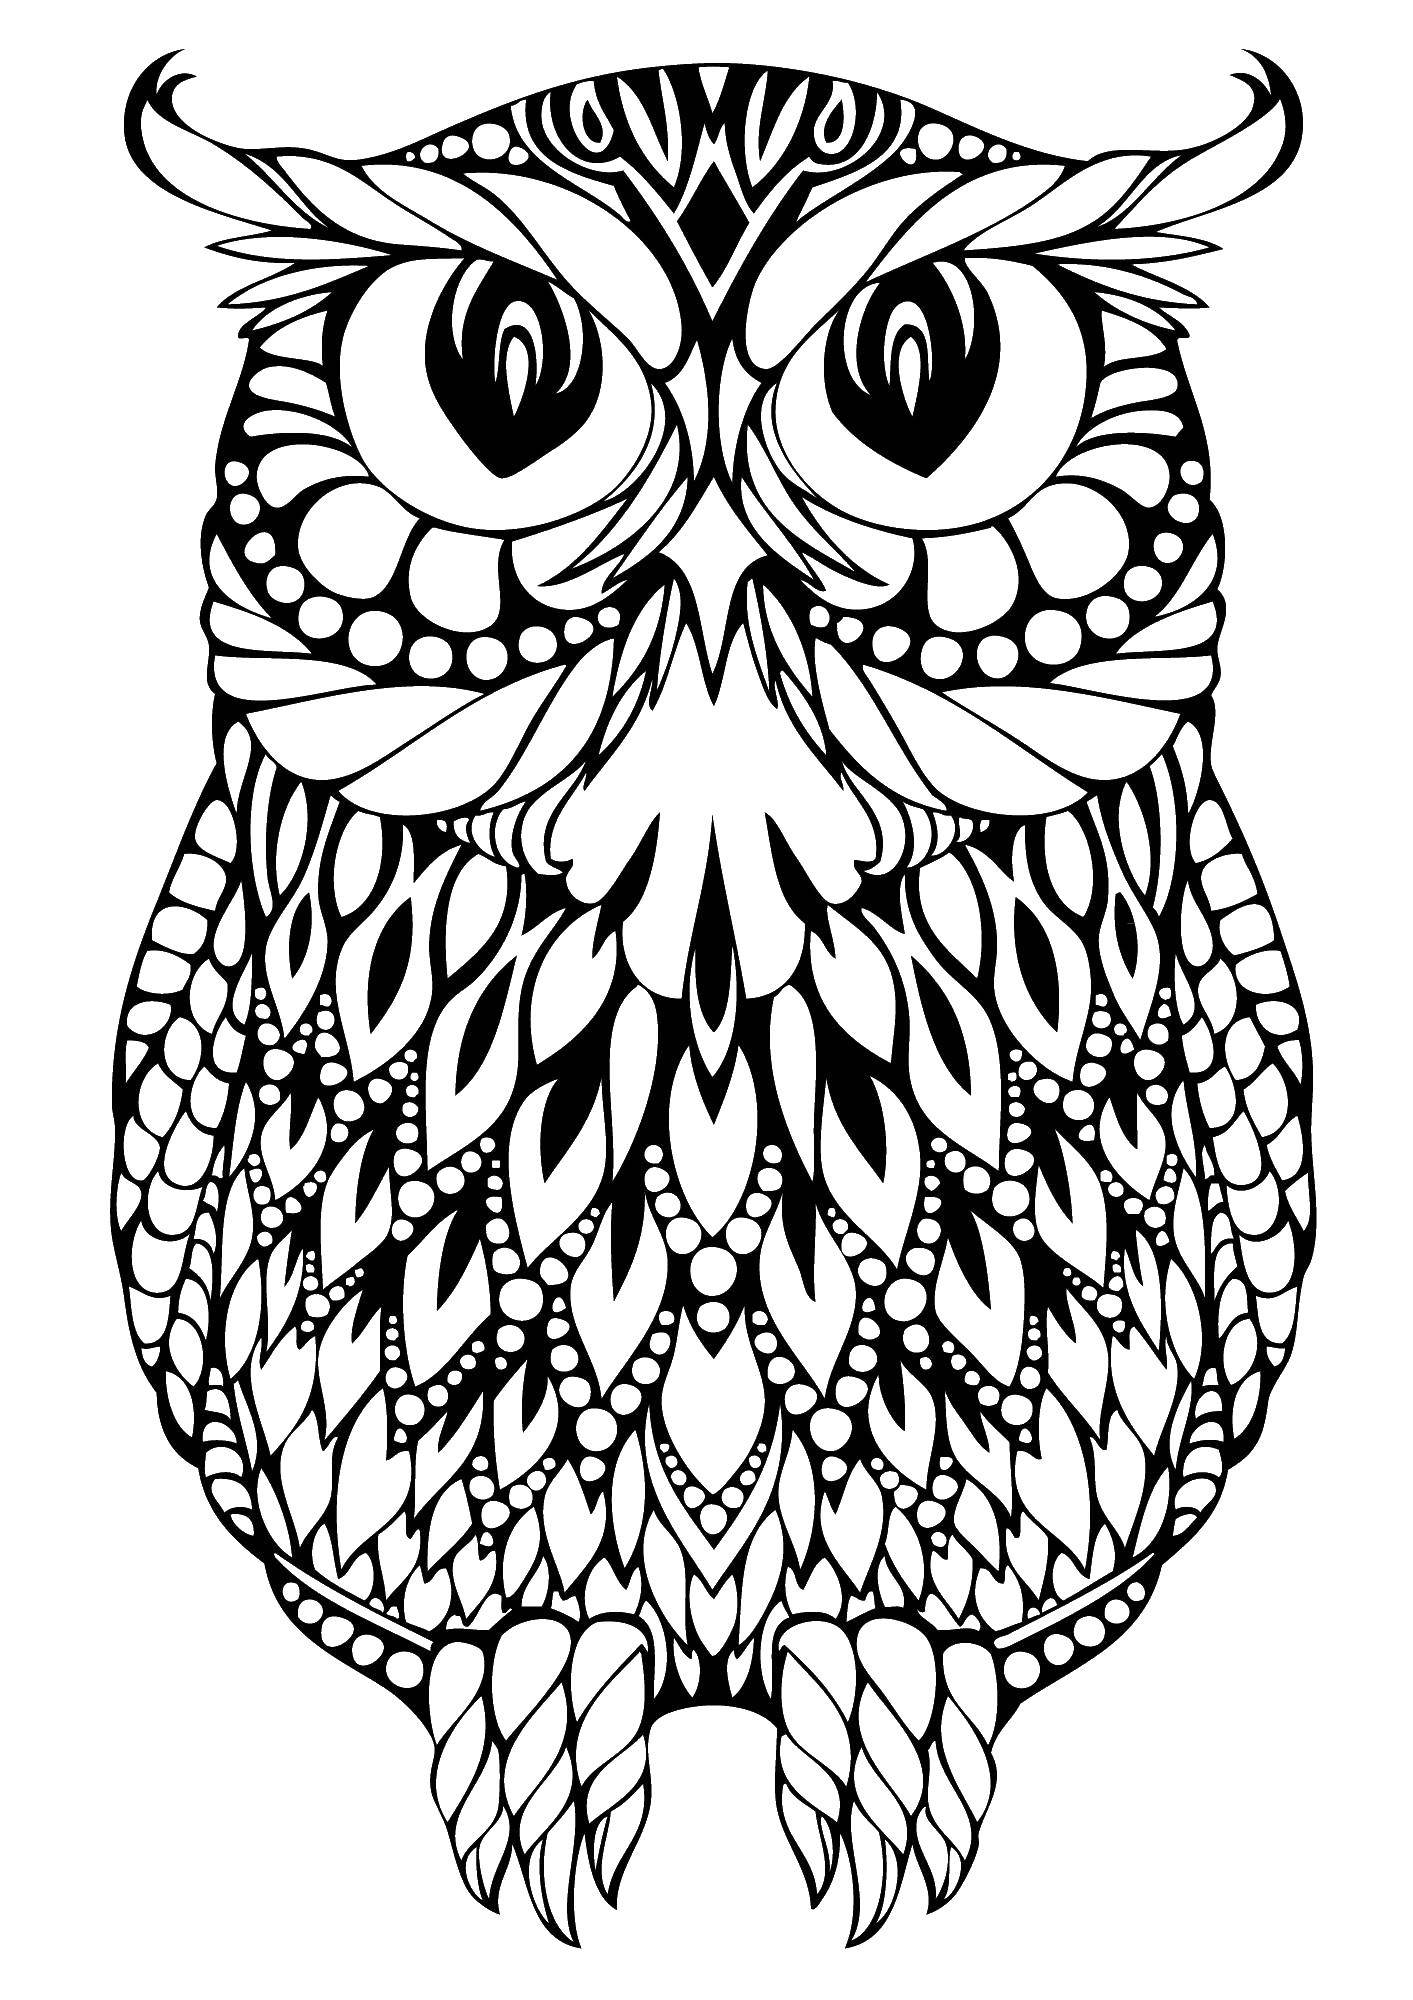 Coloring Patterned feathers owl. Category birds. Tags:  Birds, owl.